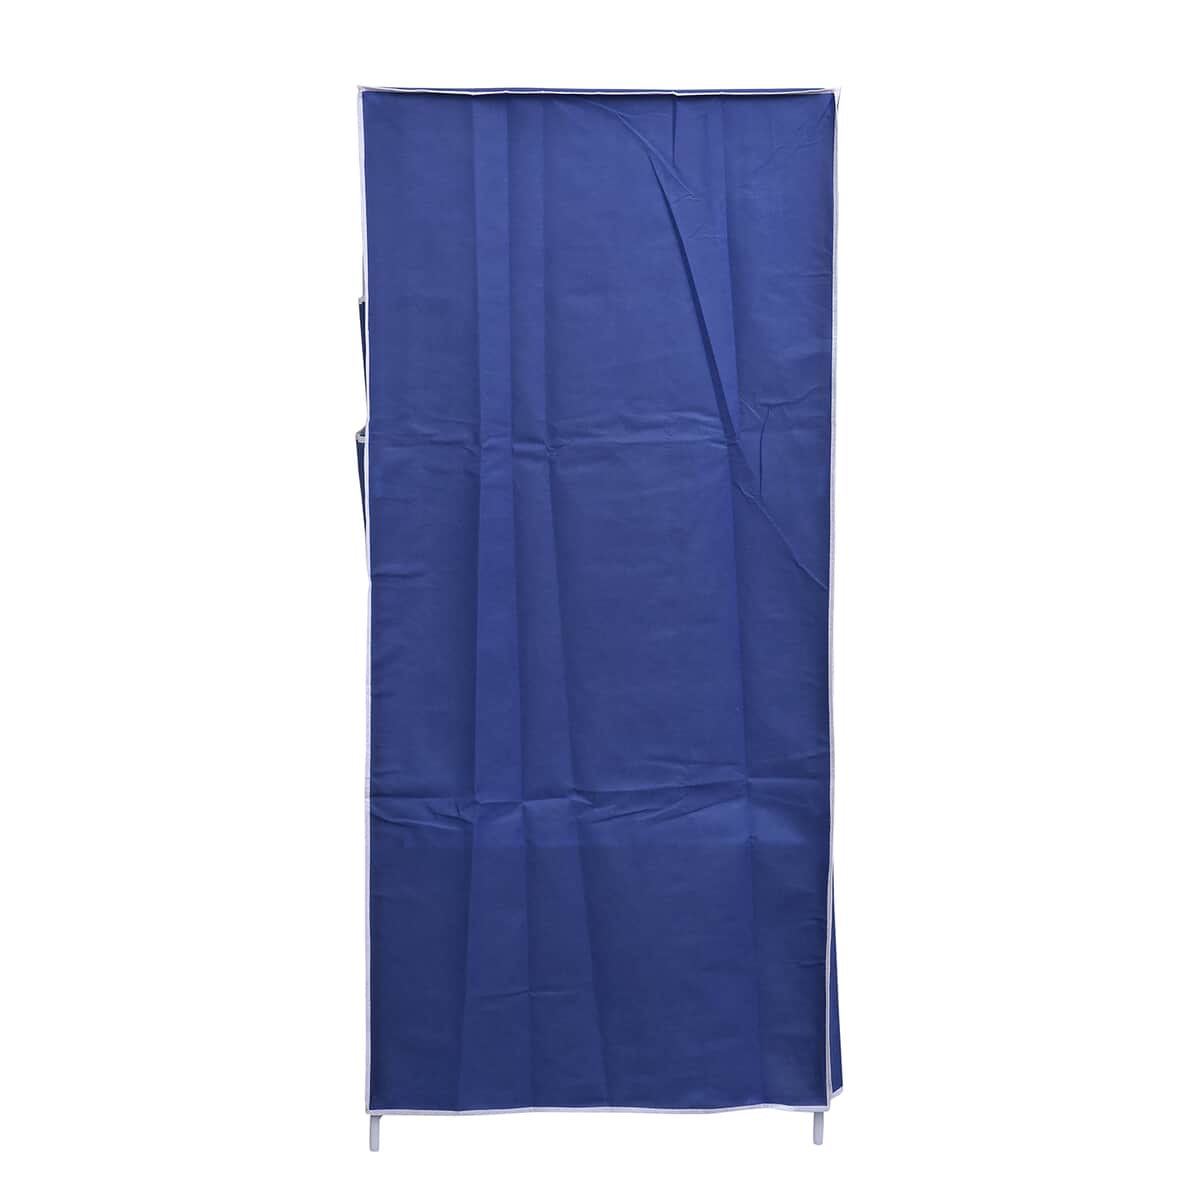 Blue Collapsible Wardrobe with 2 Outer pockets and Zippered Door (Non-Woven Fabric) image number 4